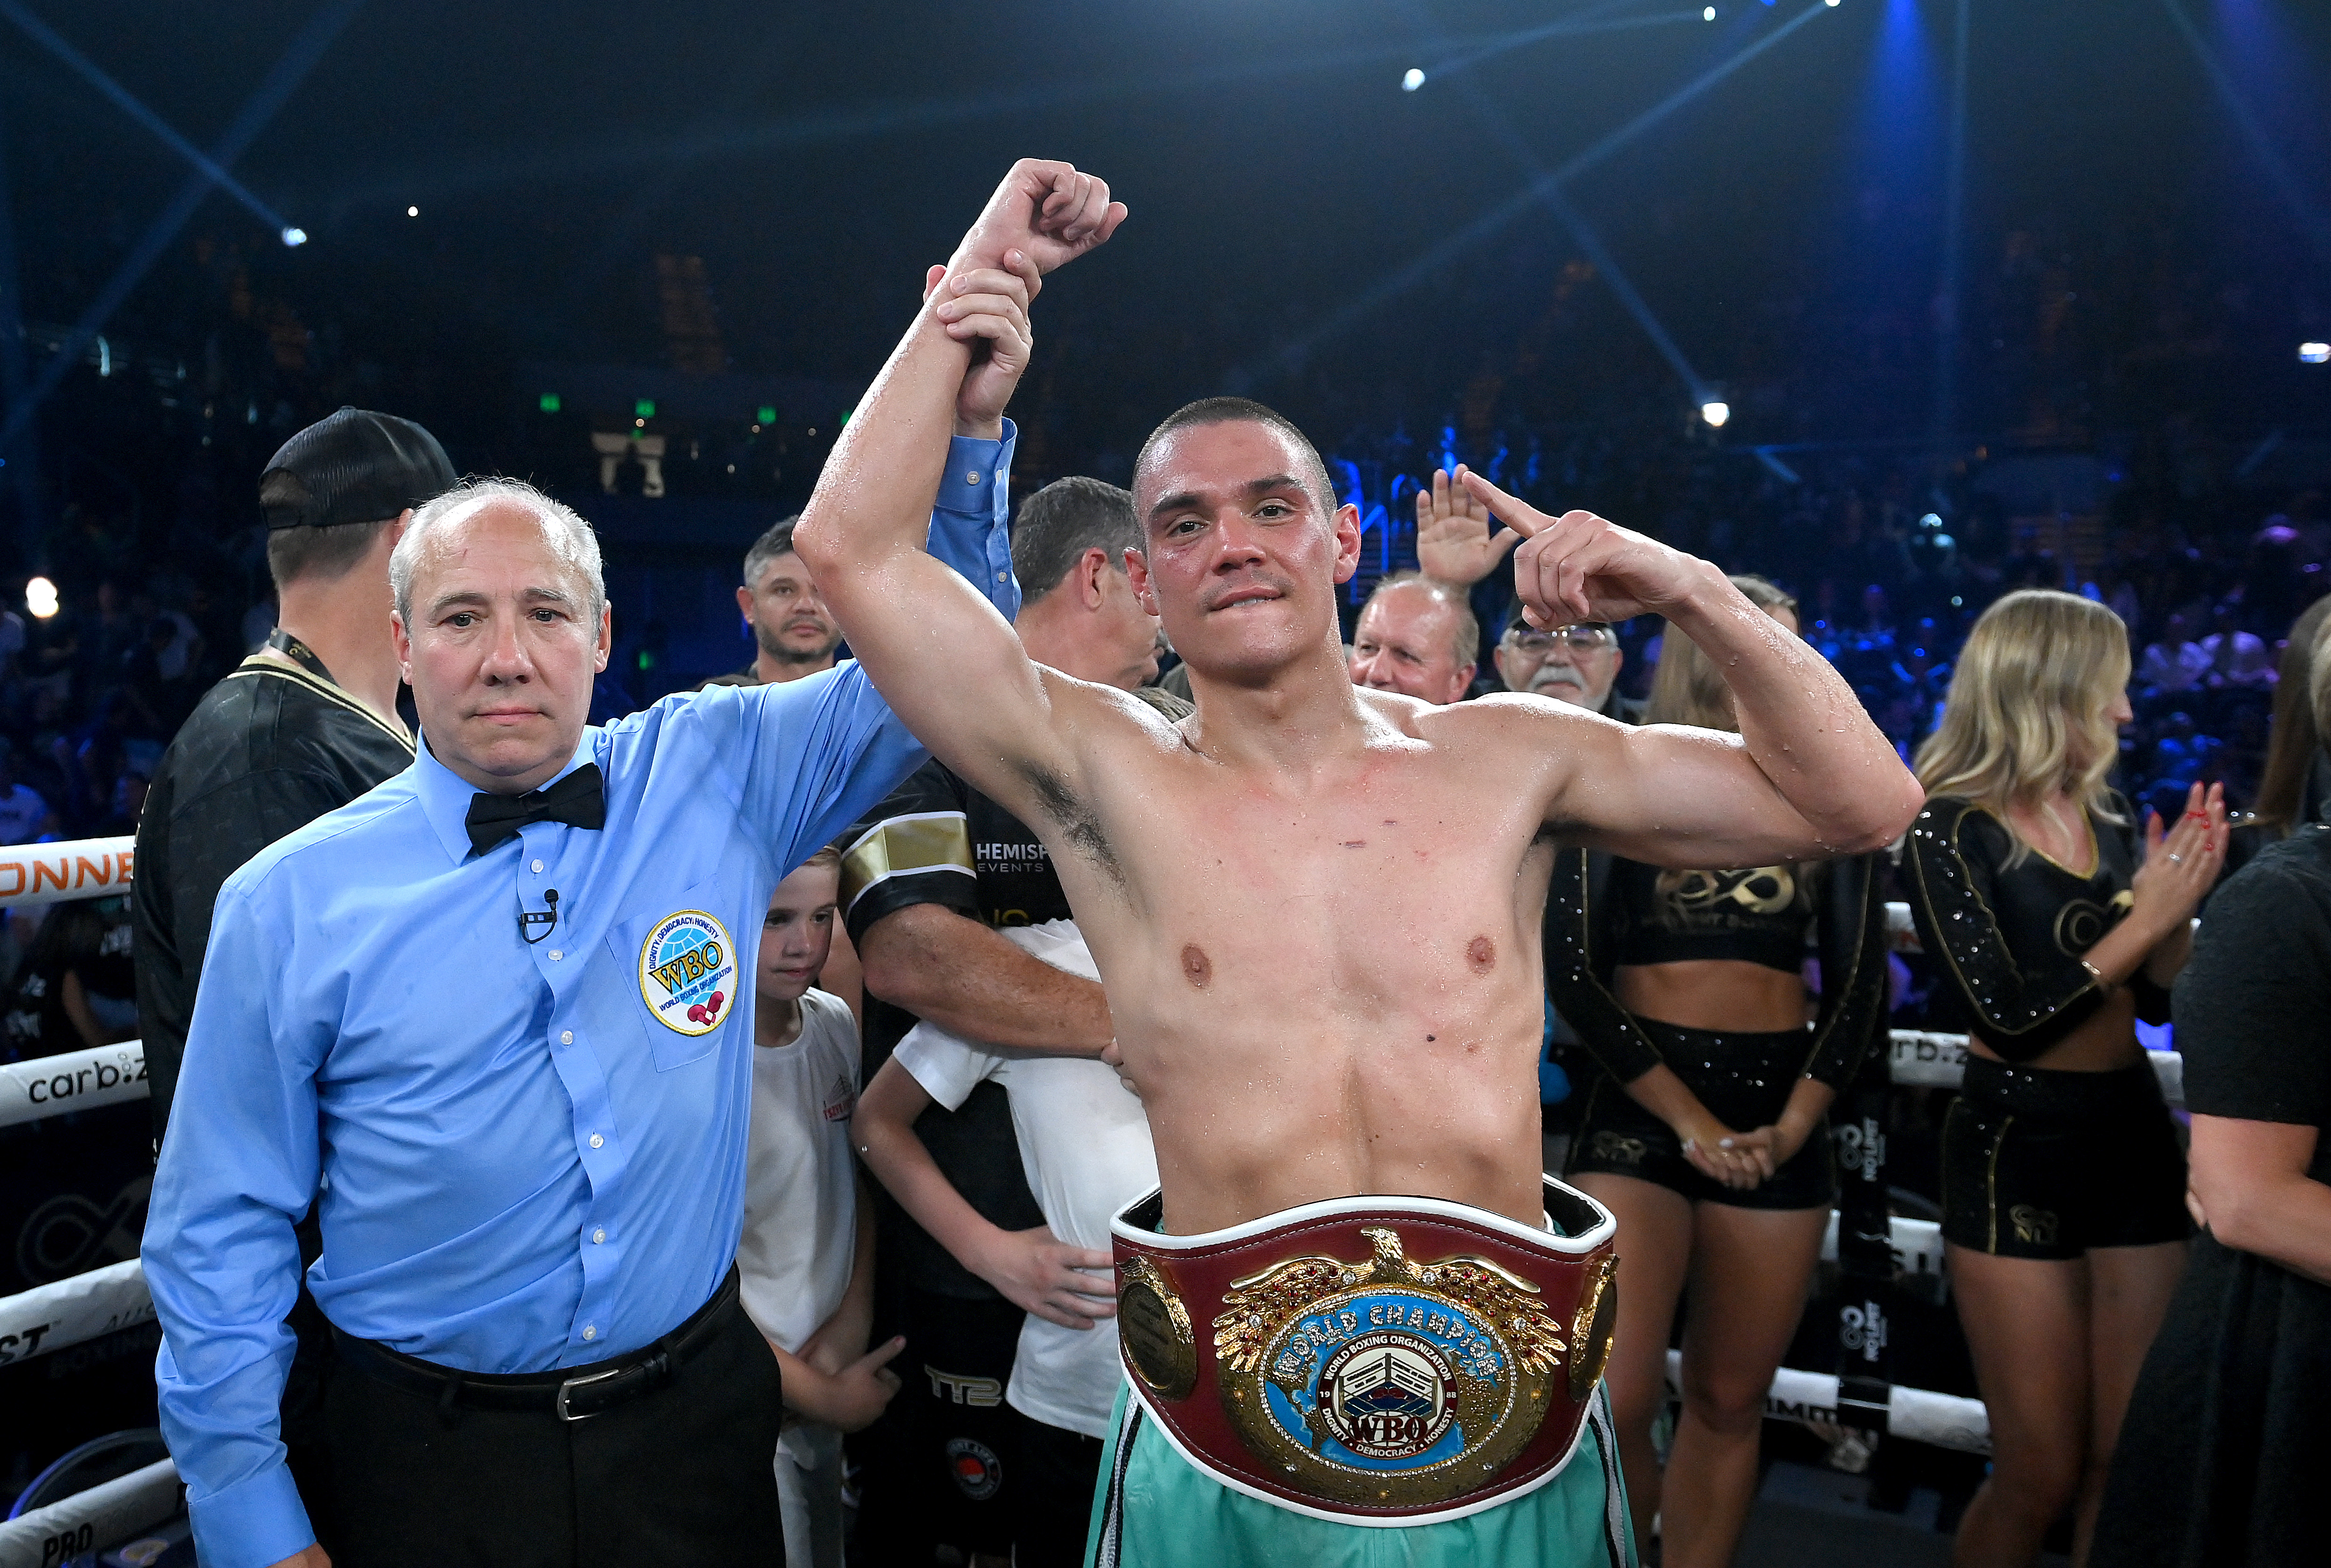 Tim Tszyu kept his standing at 154 lbs as he shoots for the biggest fights he can find